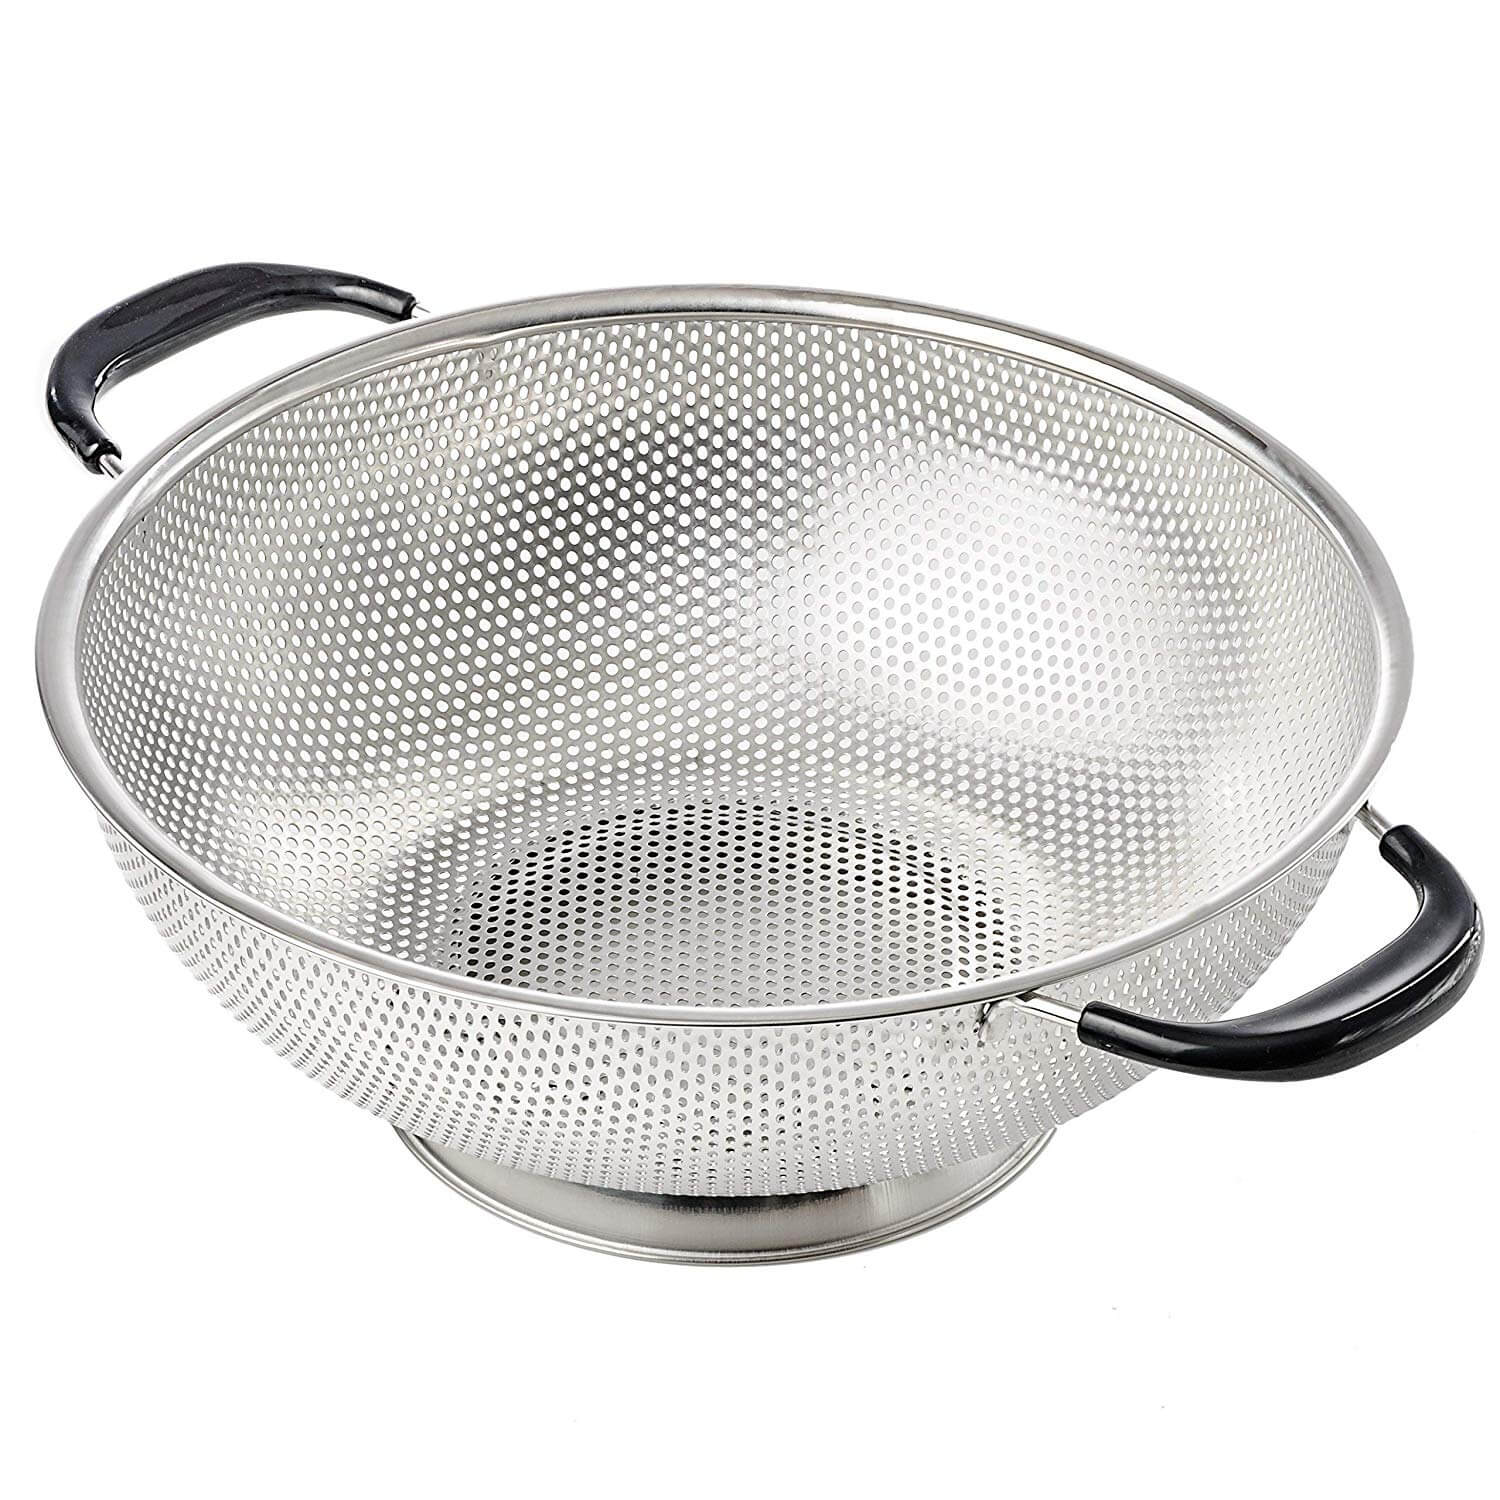 KUKPO Easy Grip - 5-Quart Stainless Steel Colander